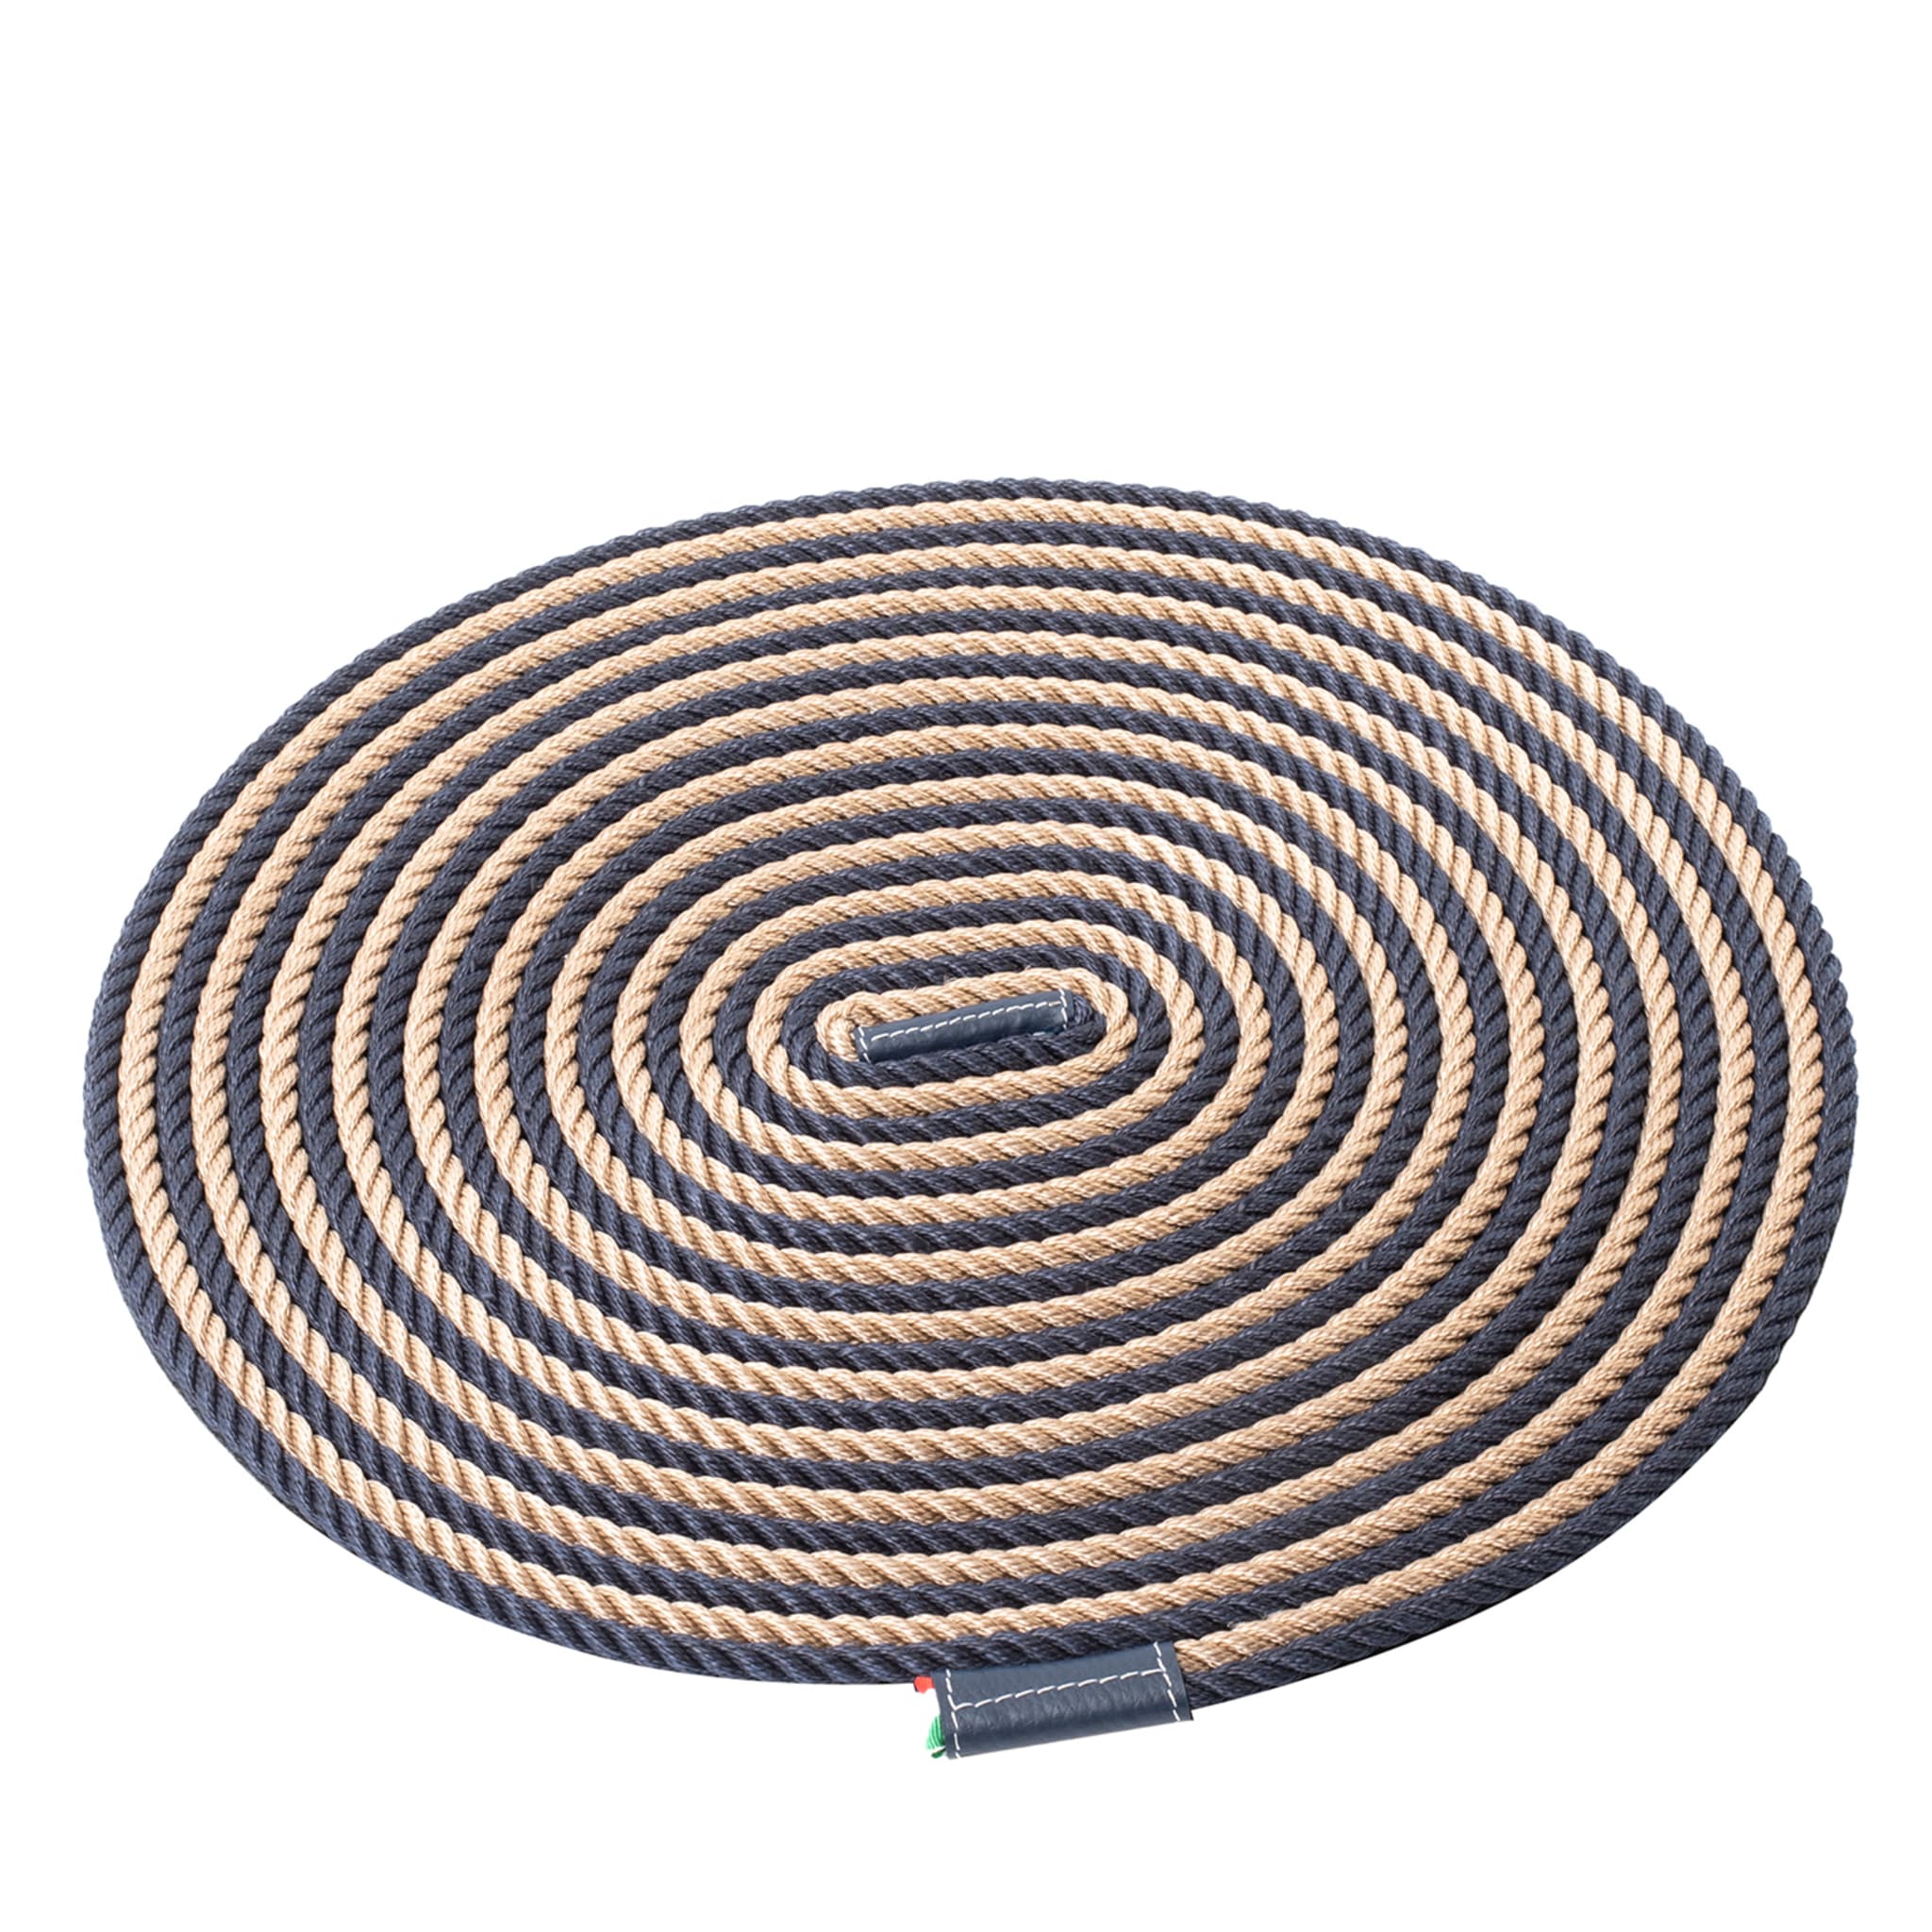 Beige & Black Coiled Rope Table Mat  - Main view